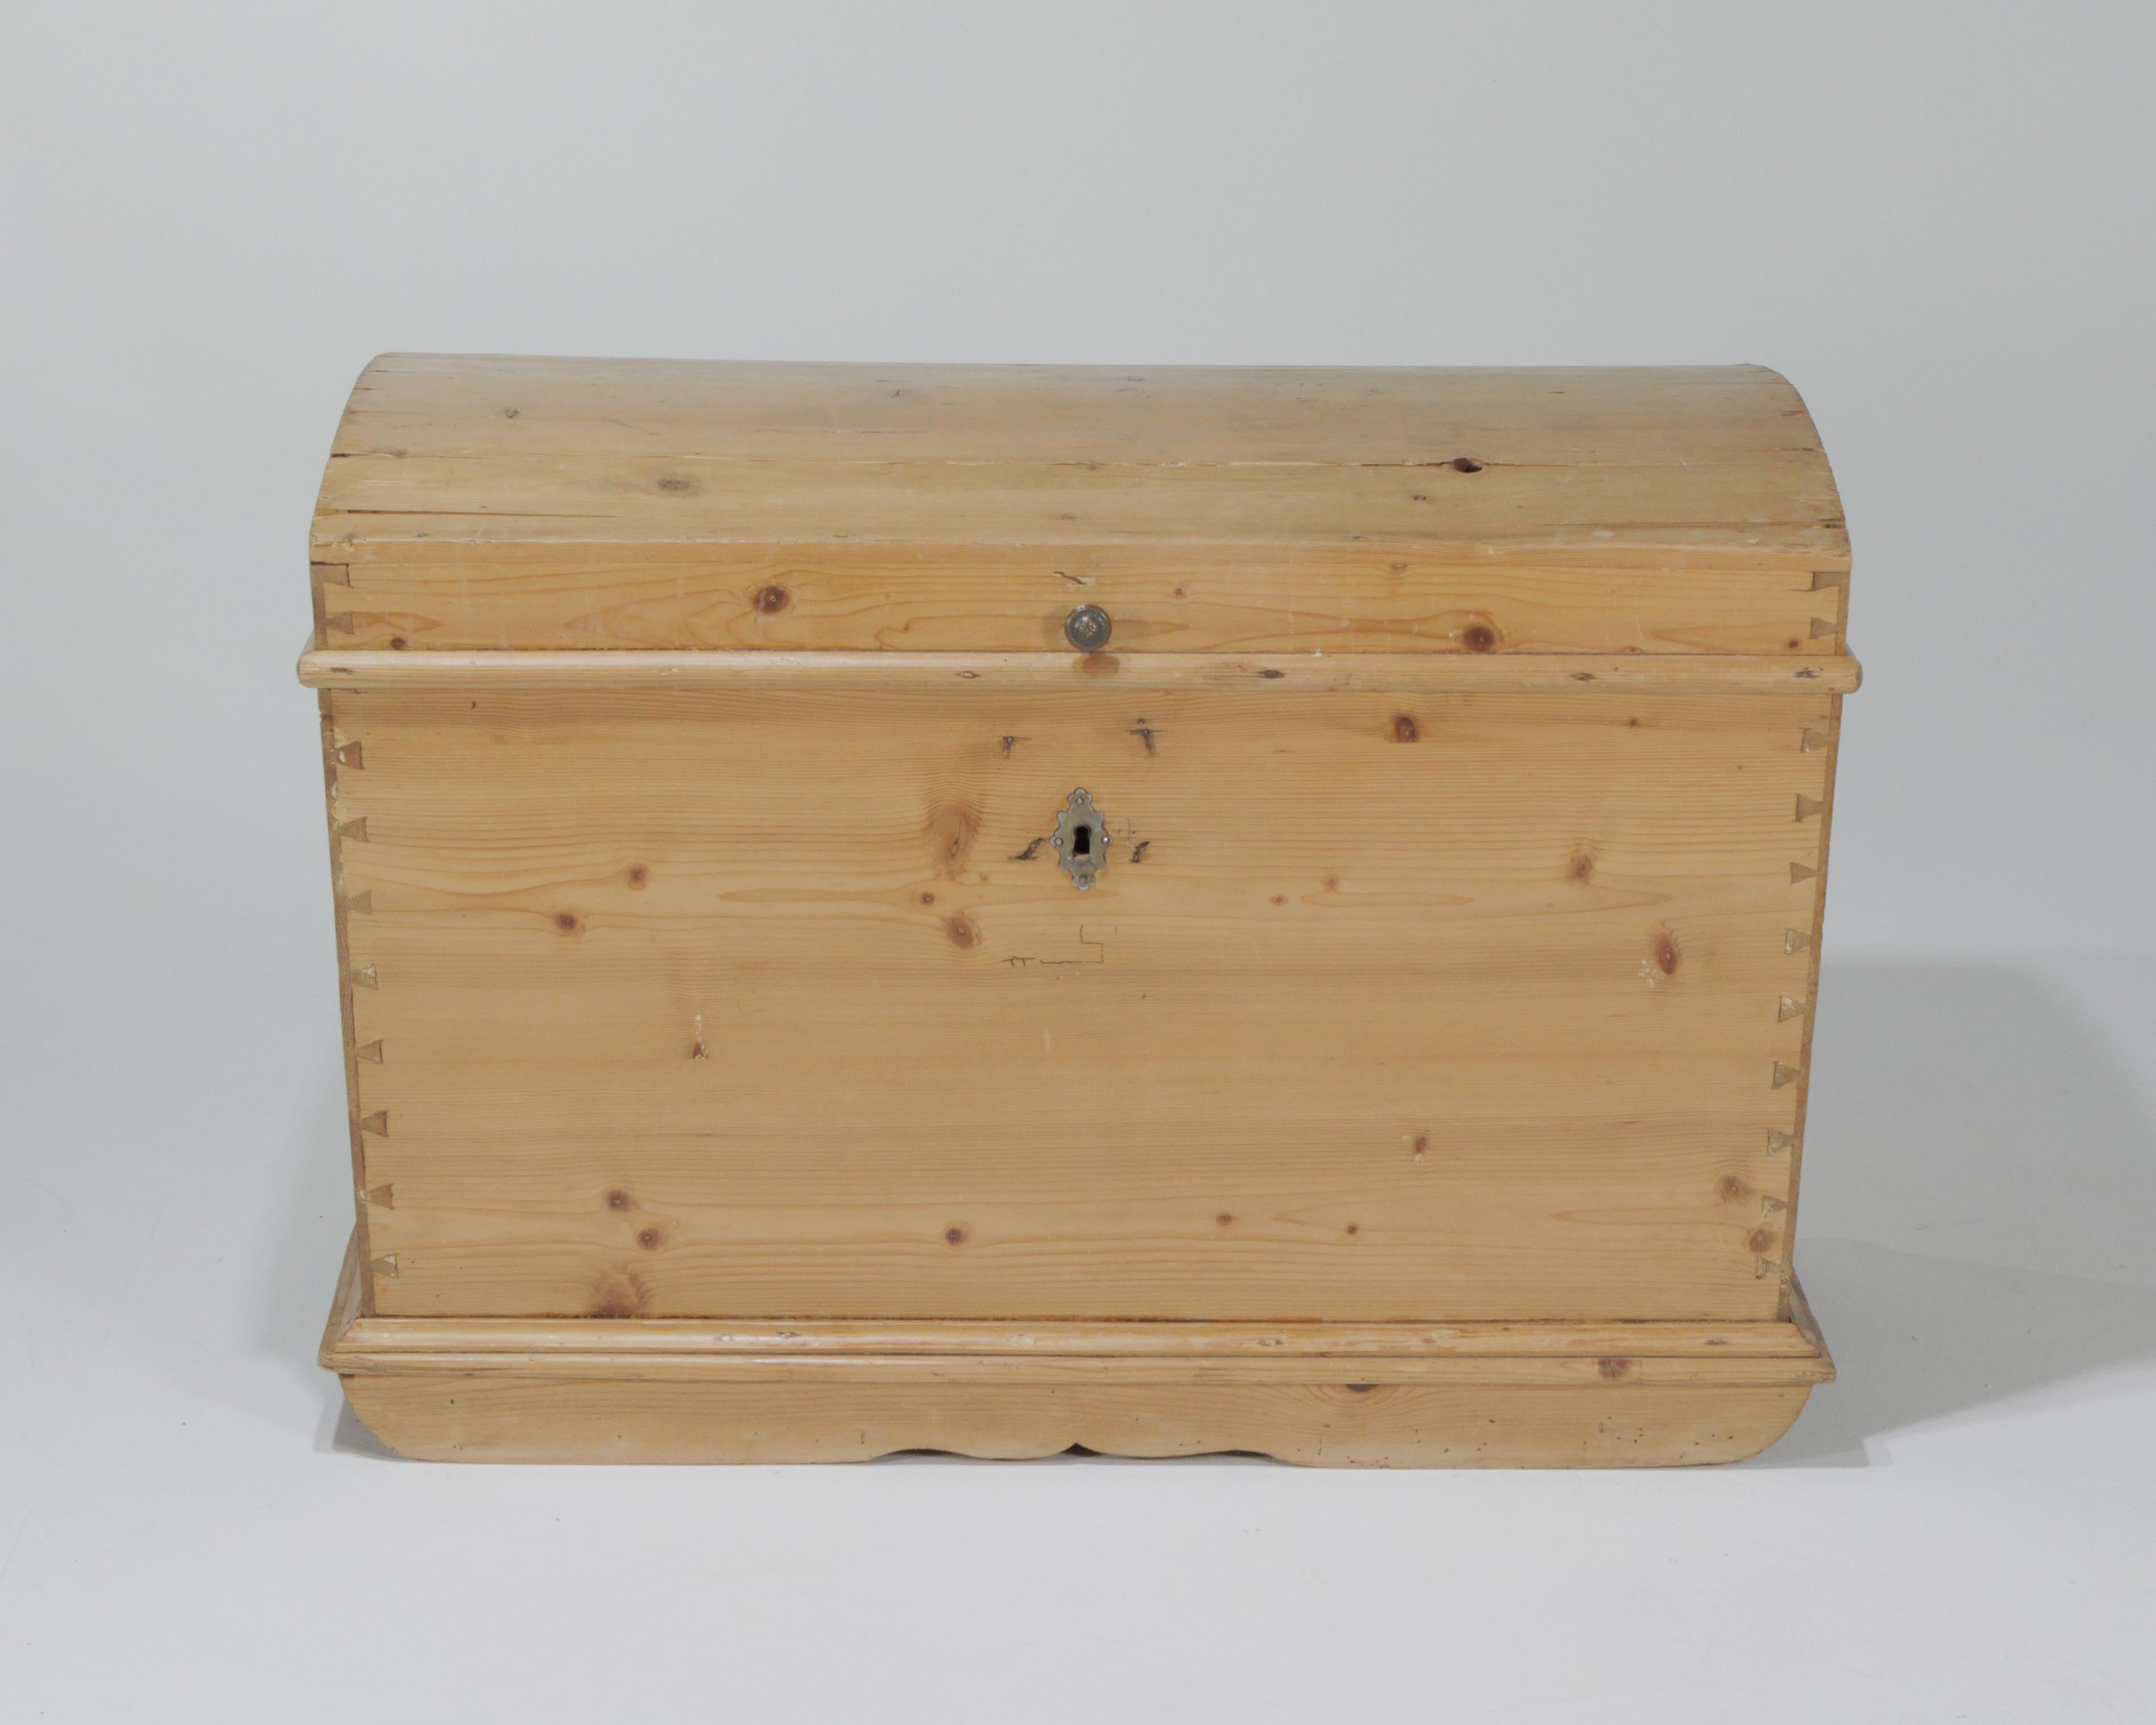 Natural pine domed shaped blanket chest with aged patina, dovetailed sides, brass and iron hardware, and lots of rustic character.